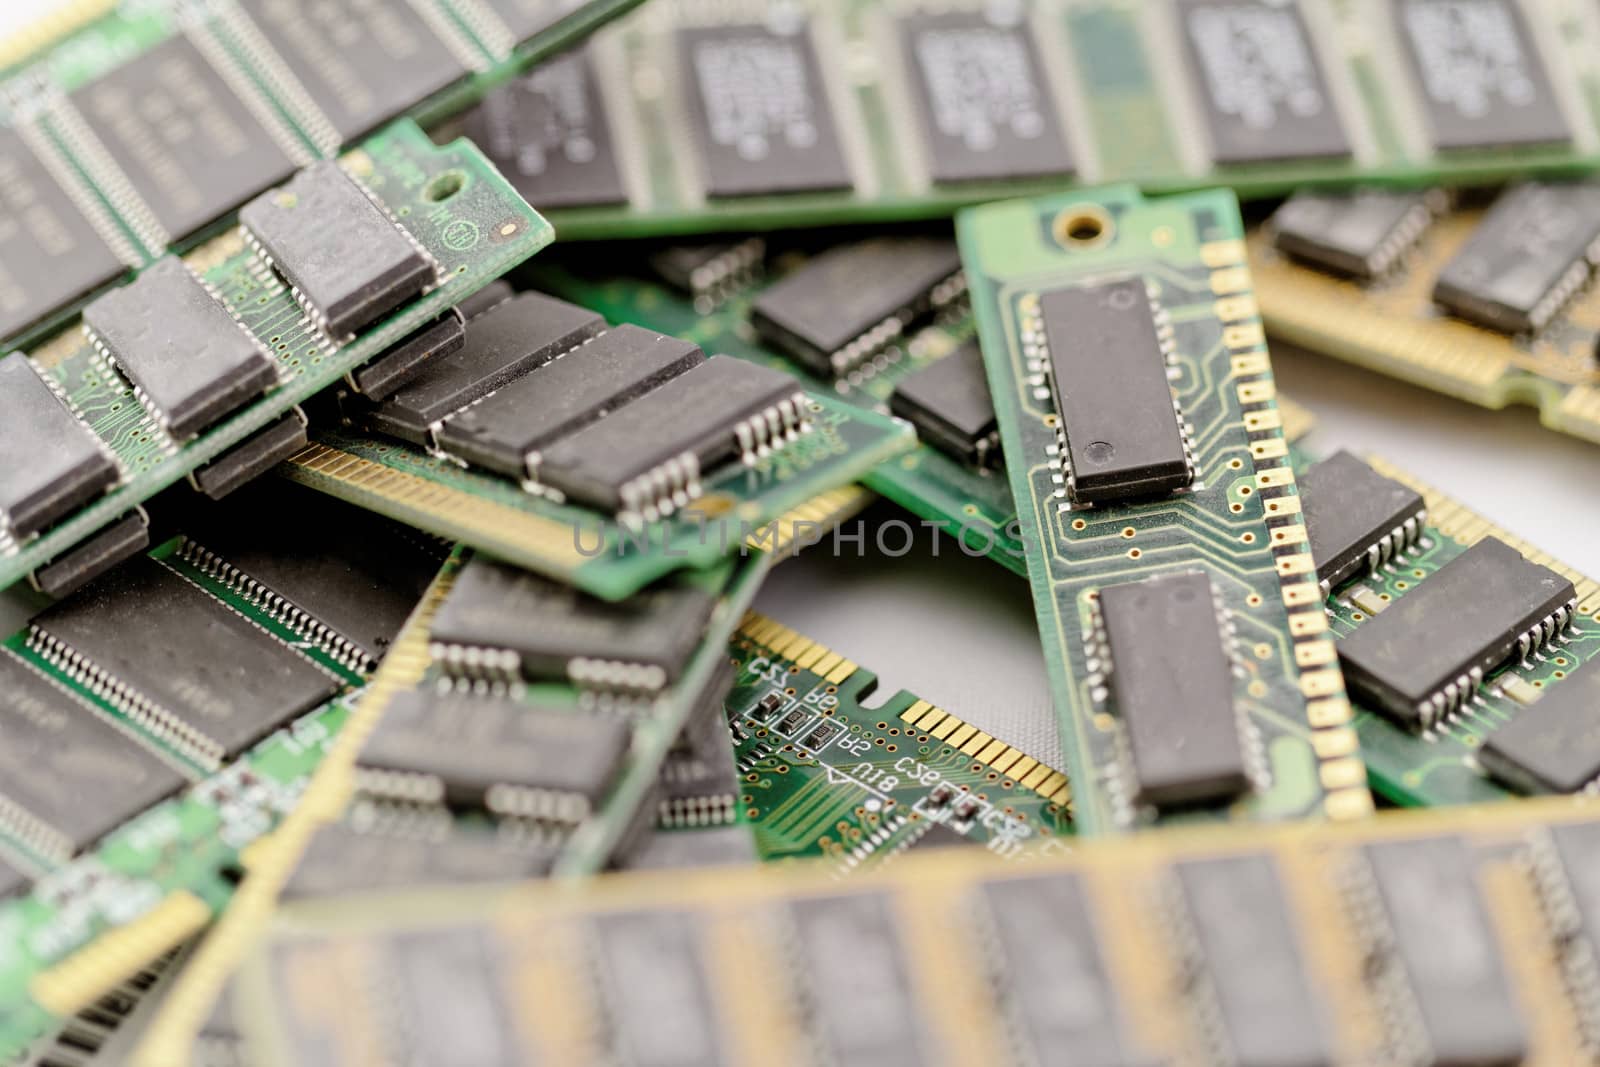 Many different computer memory modules (RAM, SD, DDR, EPROM)